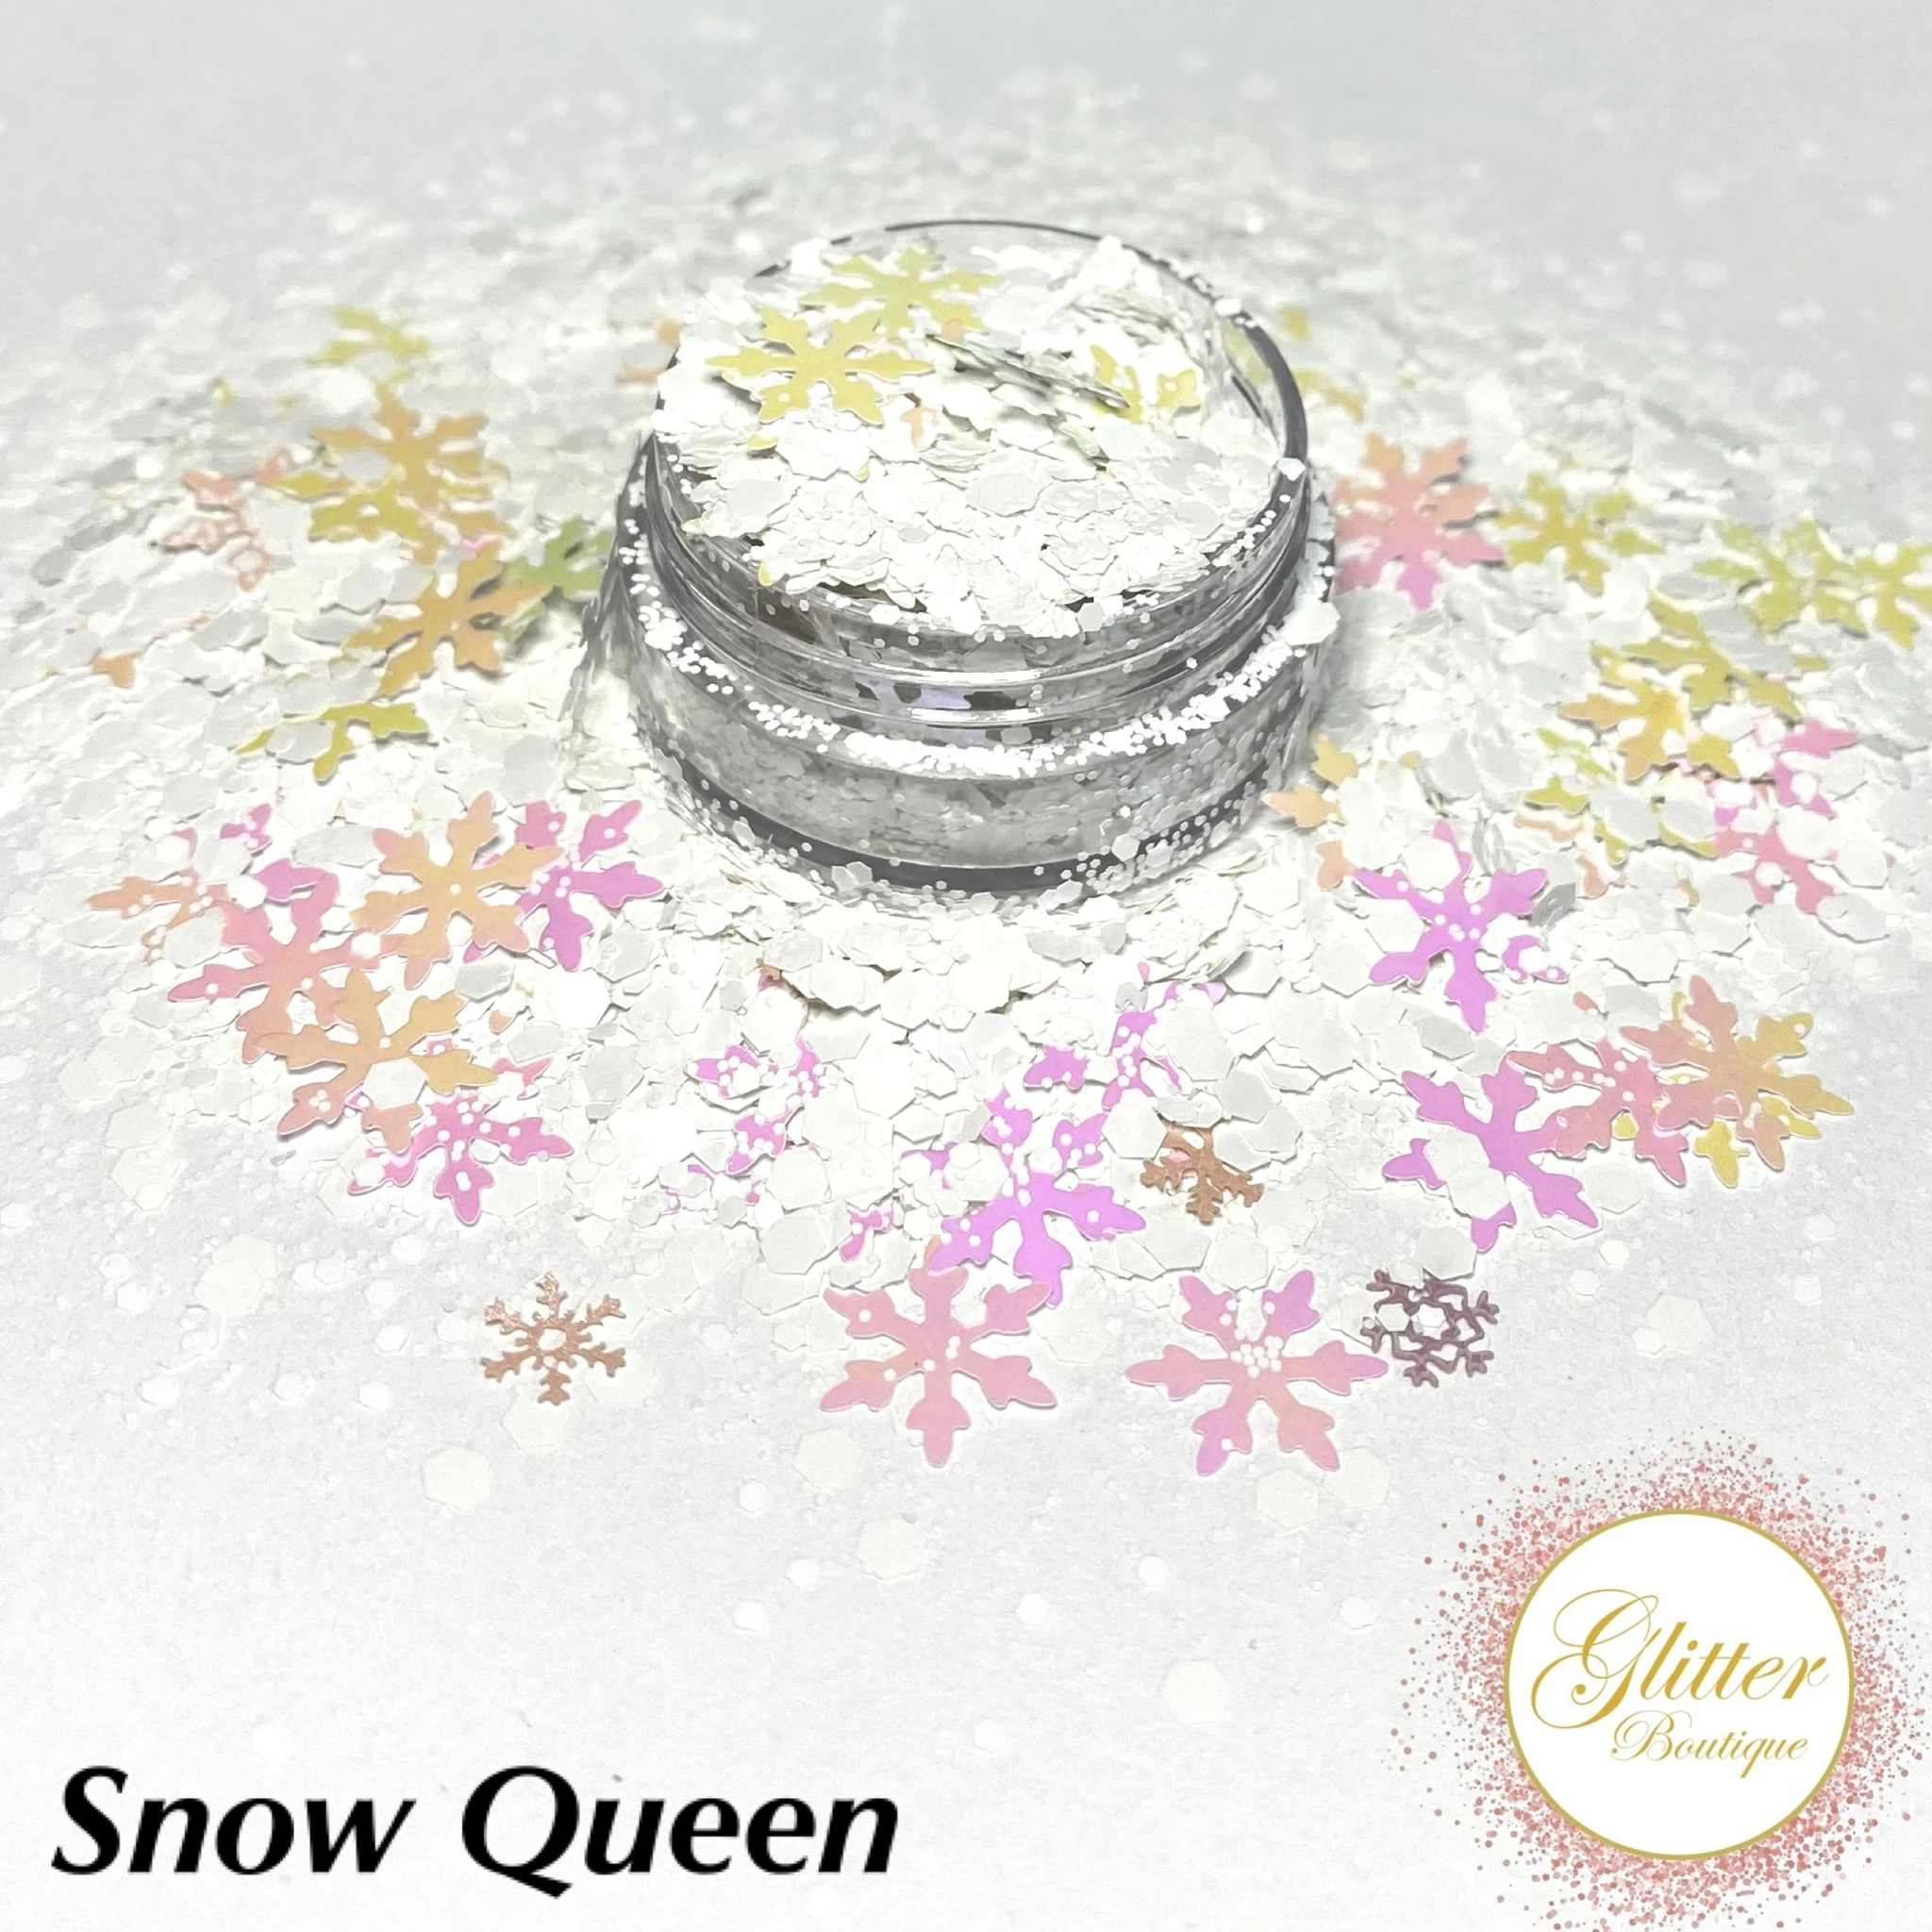 Glitter Boutique - Snow Queen - Creata Beauty - Professional Beauty Products